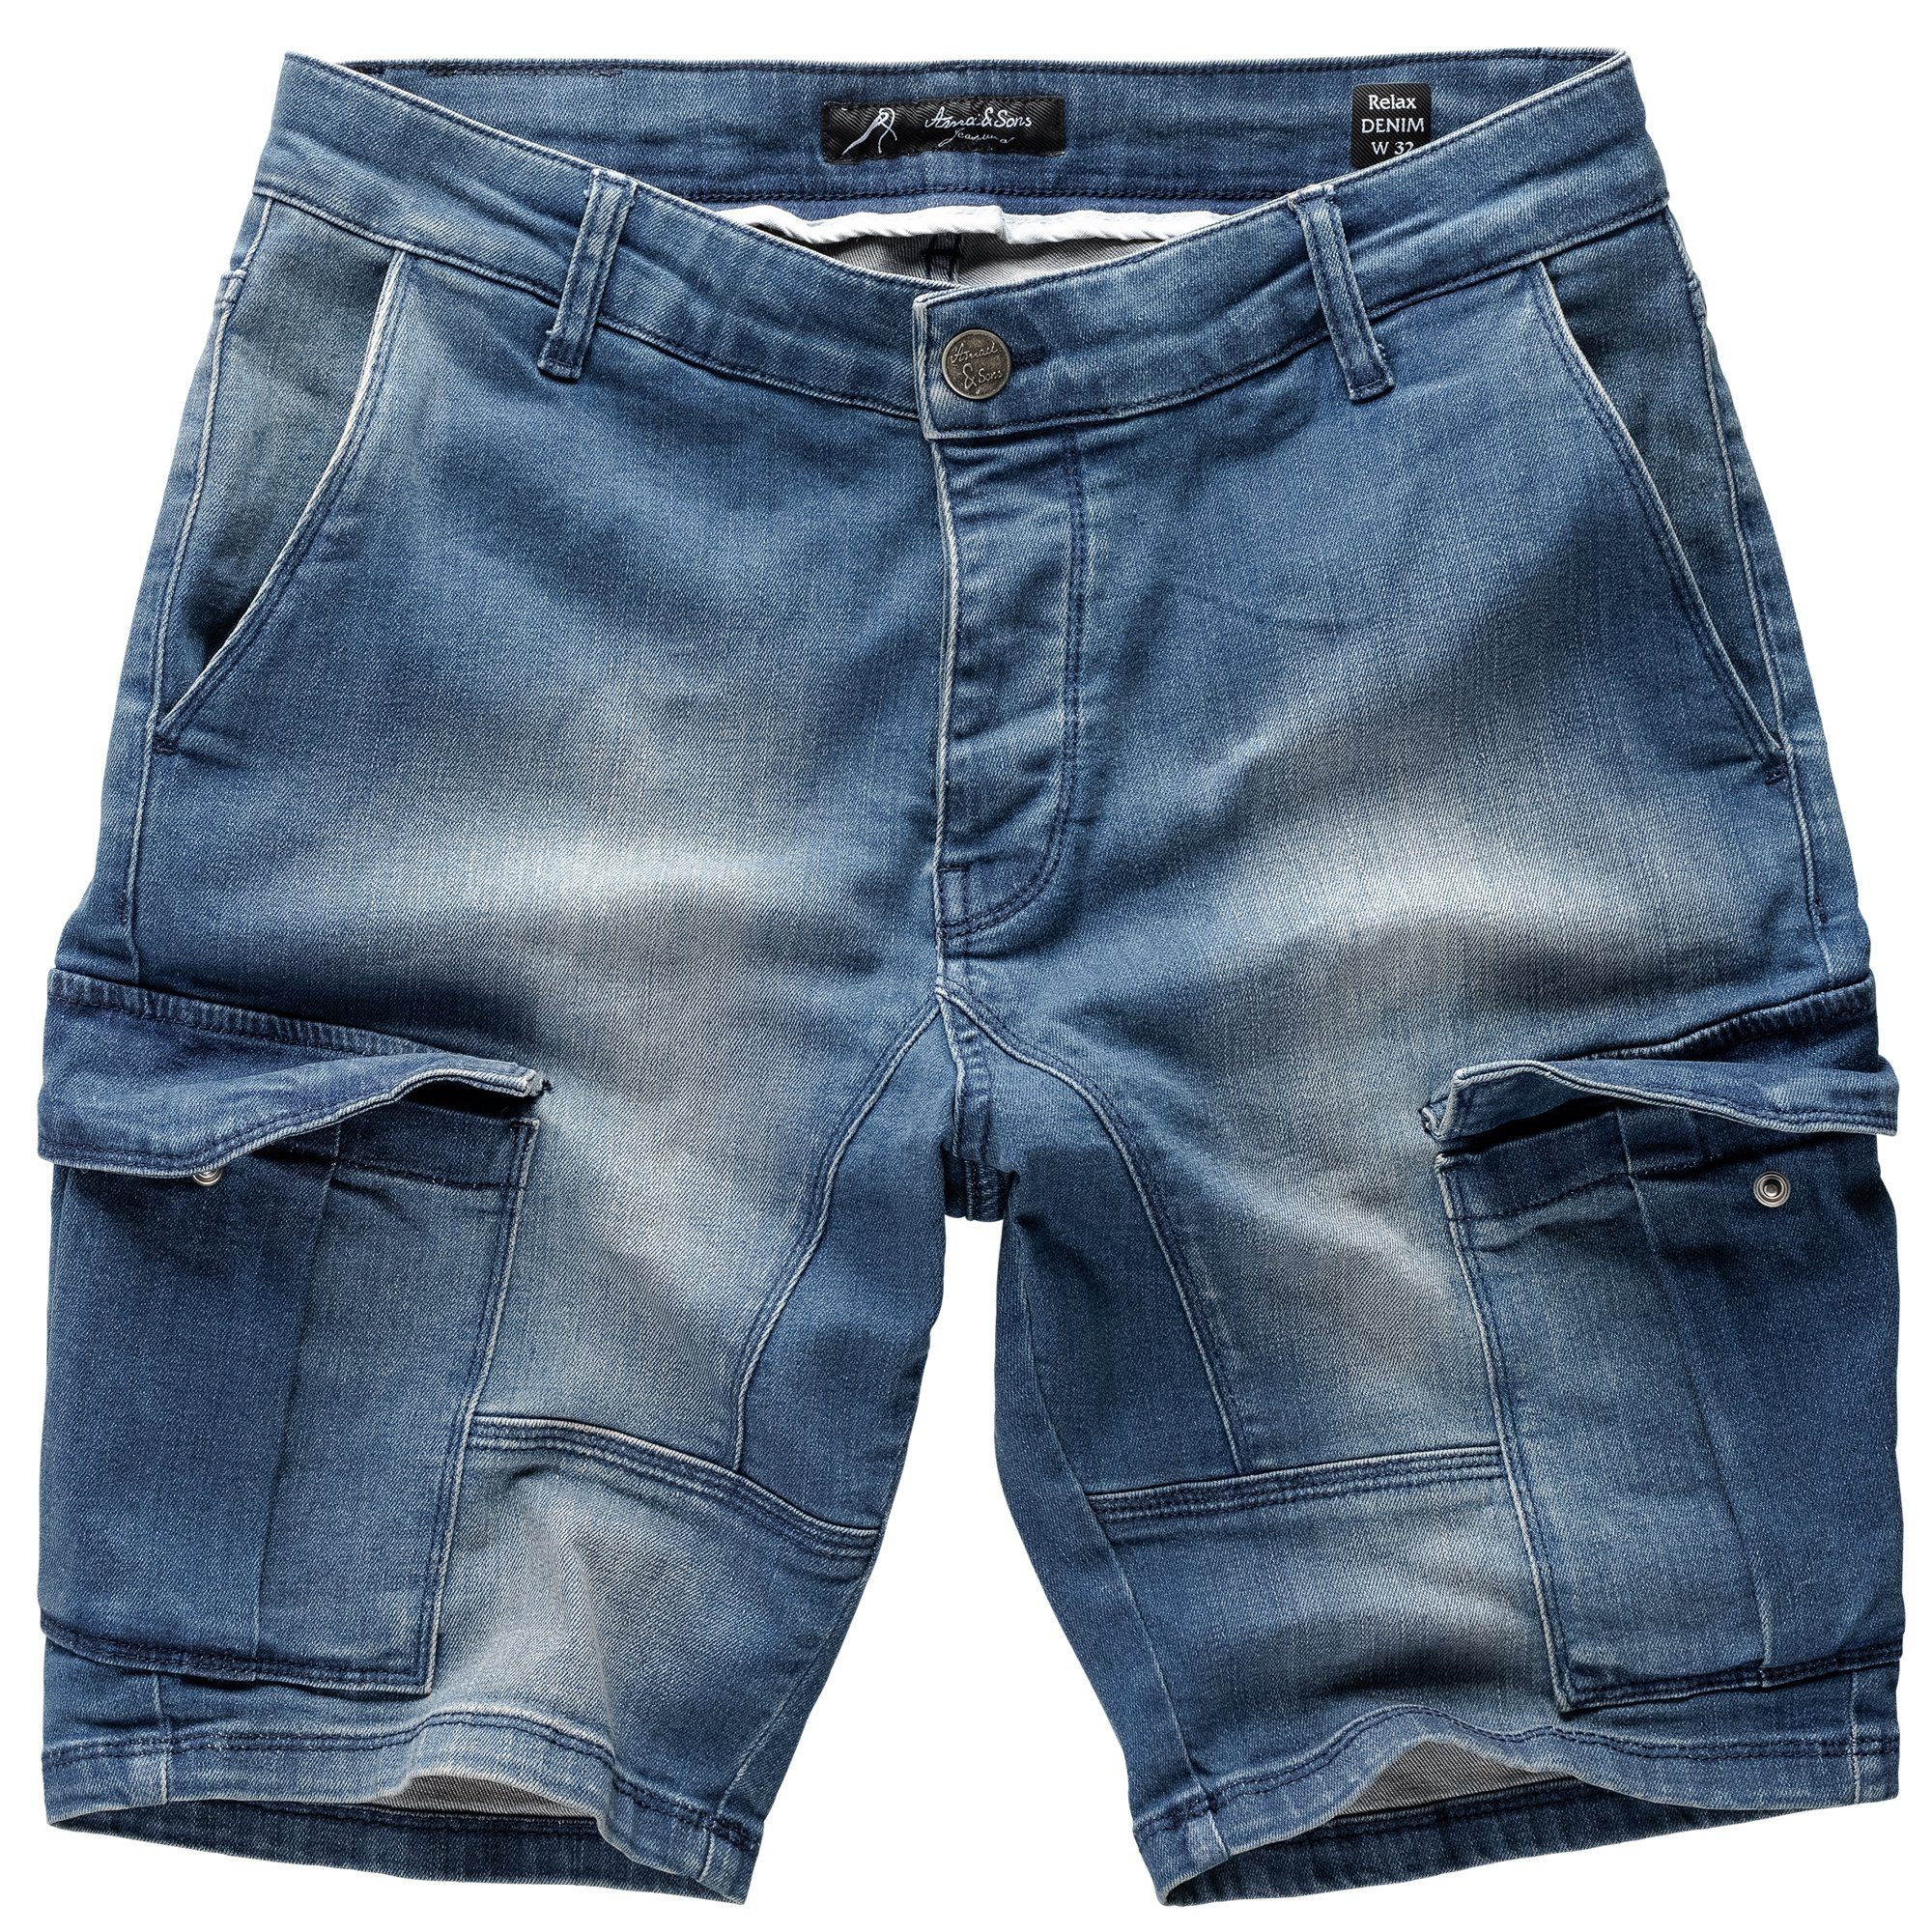 Amaci&Sons Jeansshorts SAN DIEGO Destroyed Jeans Shorts Used Blue (798)